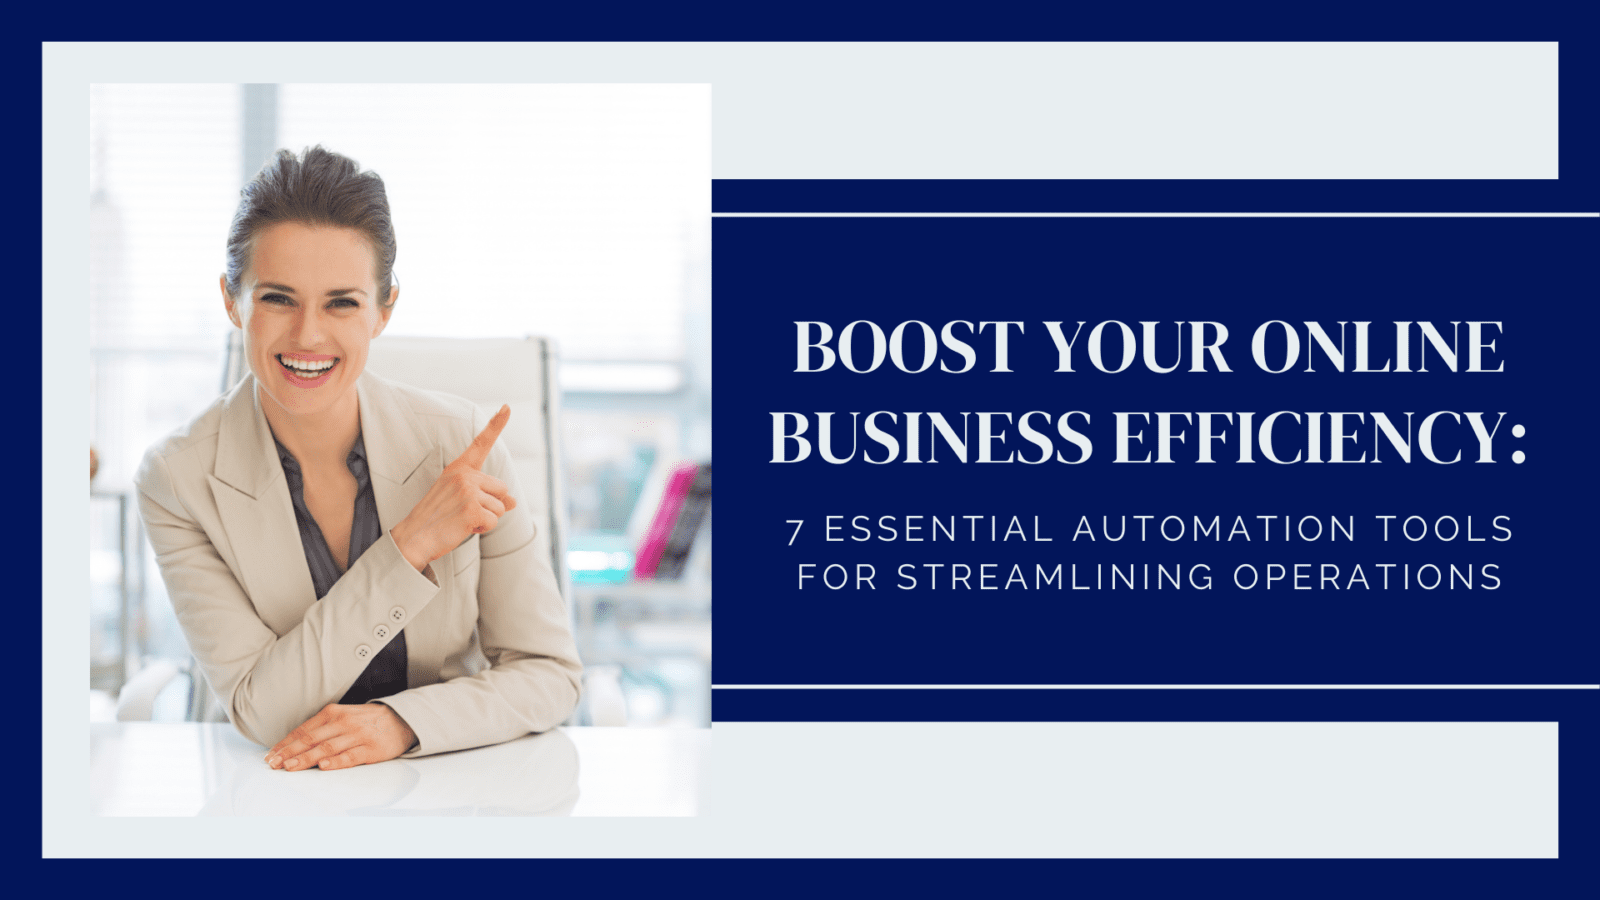 Boost Your Online Business Efficiency 7 Essential Automation Tools for Streamlining Operation